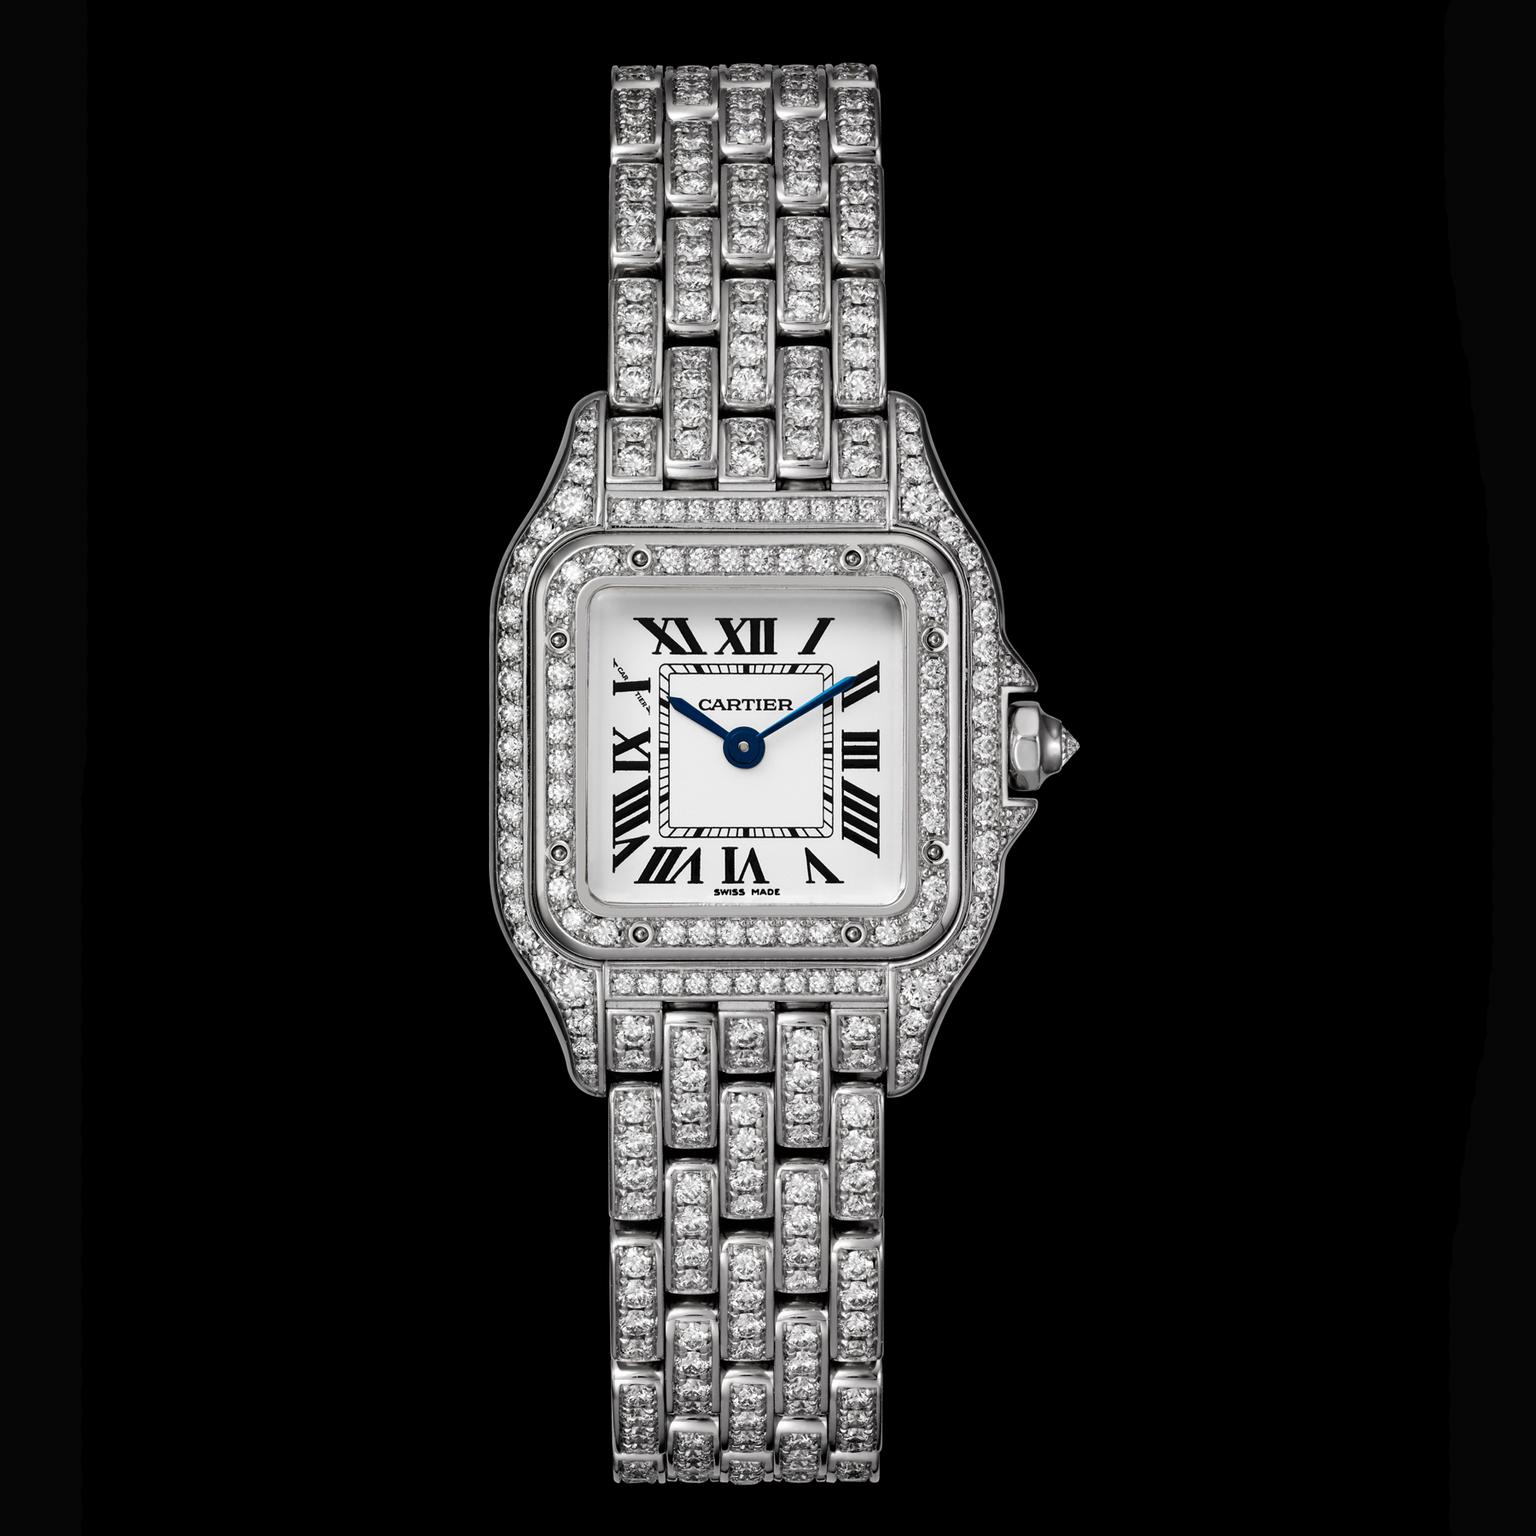 Small size Panthère de Cartier fully diamond-set watch in white gold 